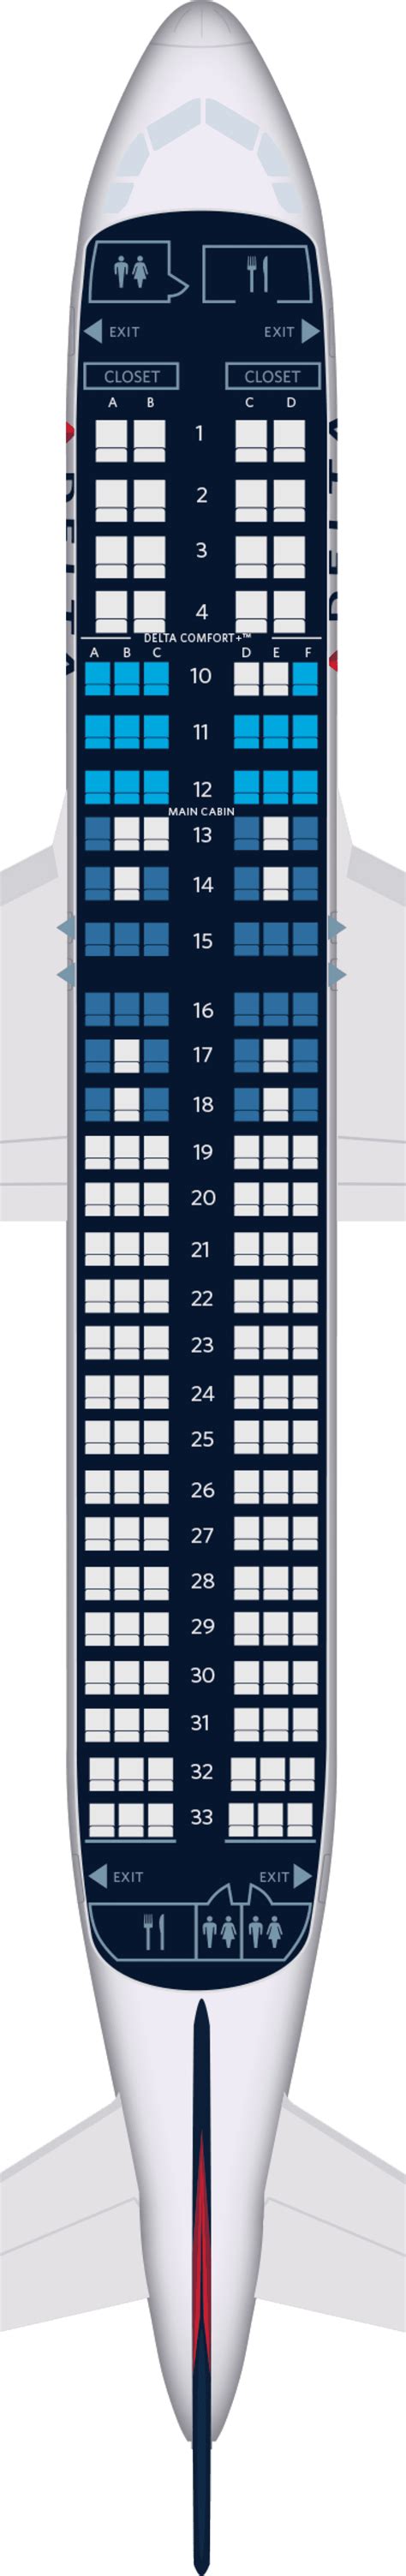 Airbus 320 seat plan. Configuration. Seat pitch *. Economy. Rows 1 to 28 (168 seats) 30 - 34” (76 - 86cm) Space+ Seats. Rows 1 - 11, seats ABC and Rows 1 - 3, seats DEF. * Seat pitch - the distance between a point on one seat and the same point on the seat in front of it. 